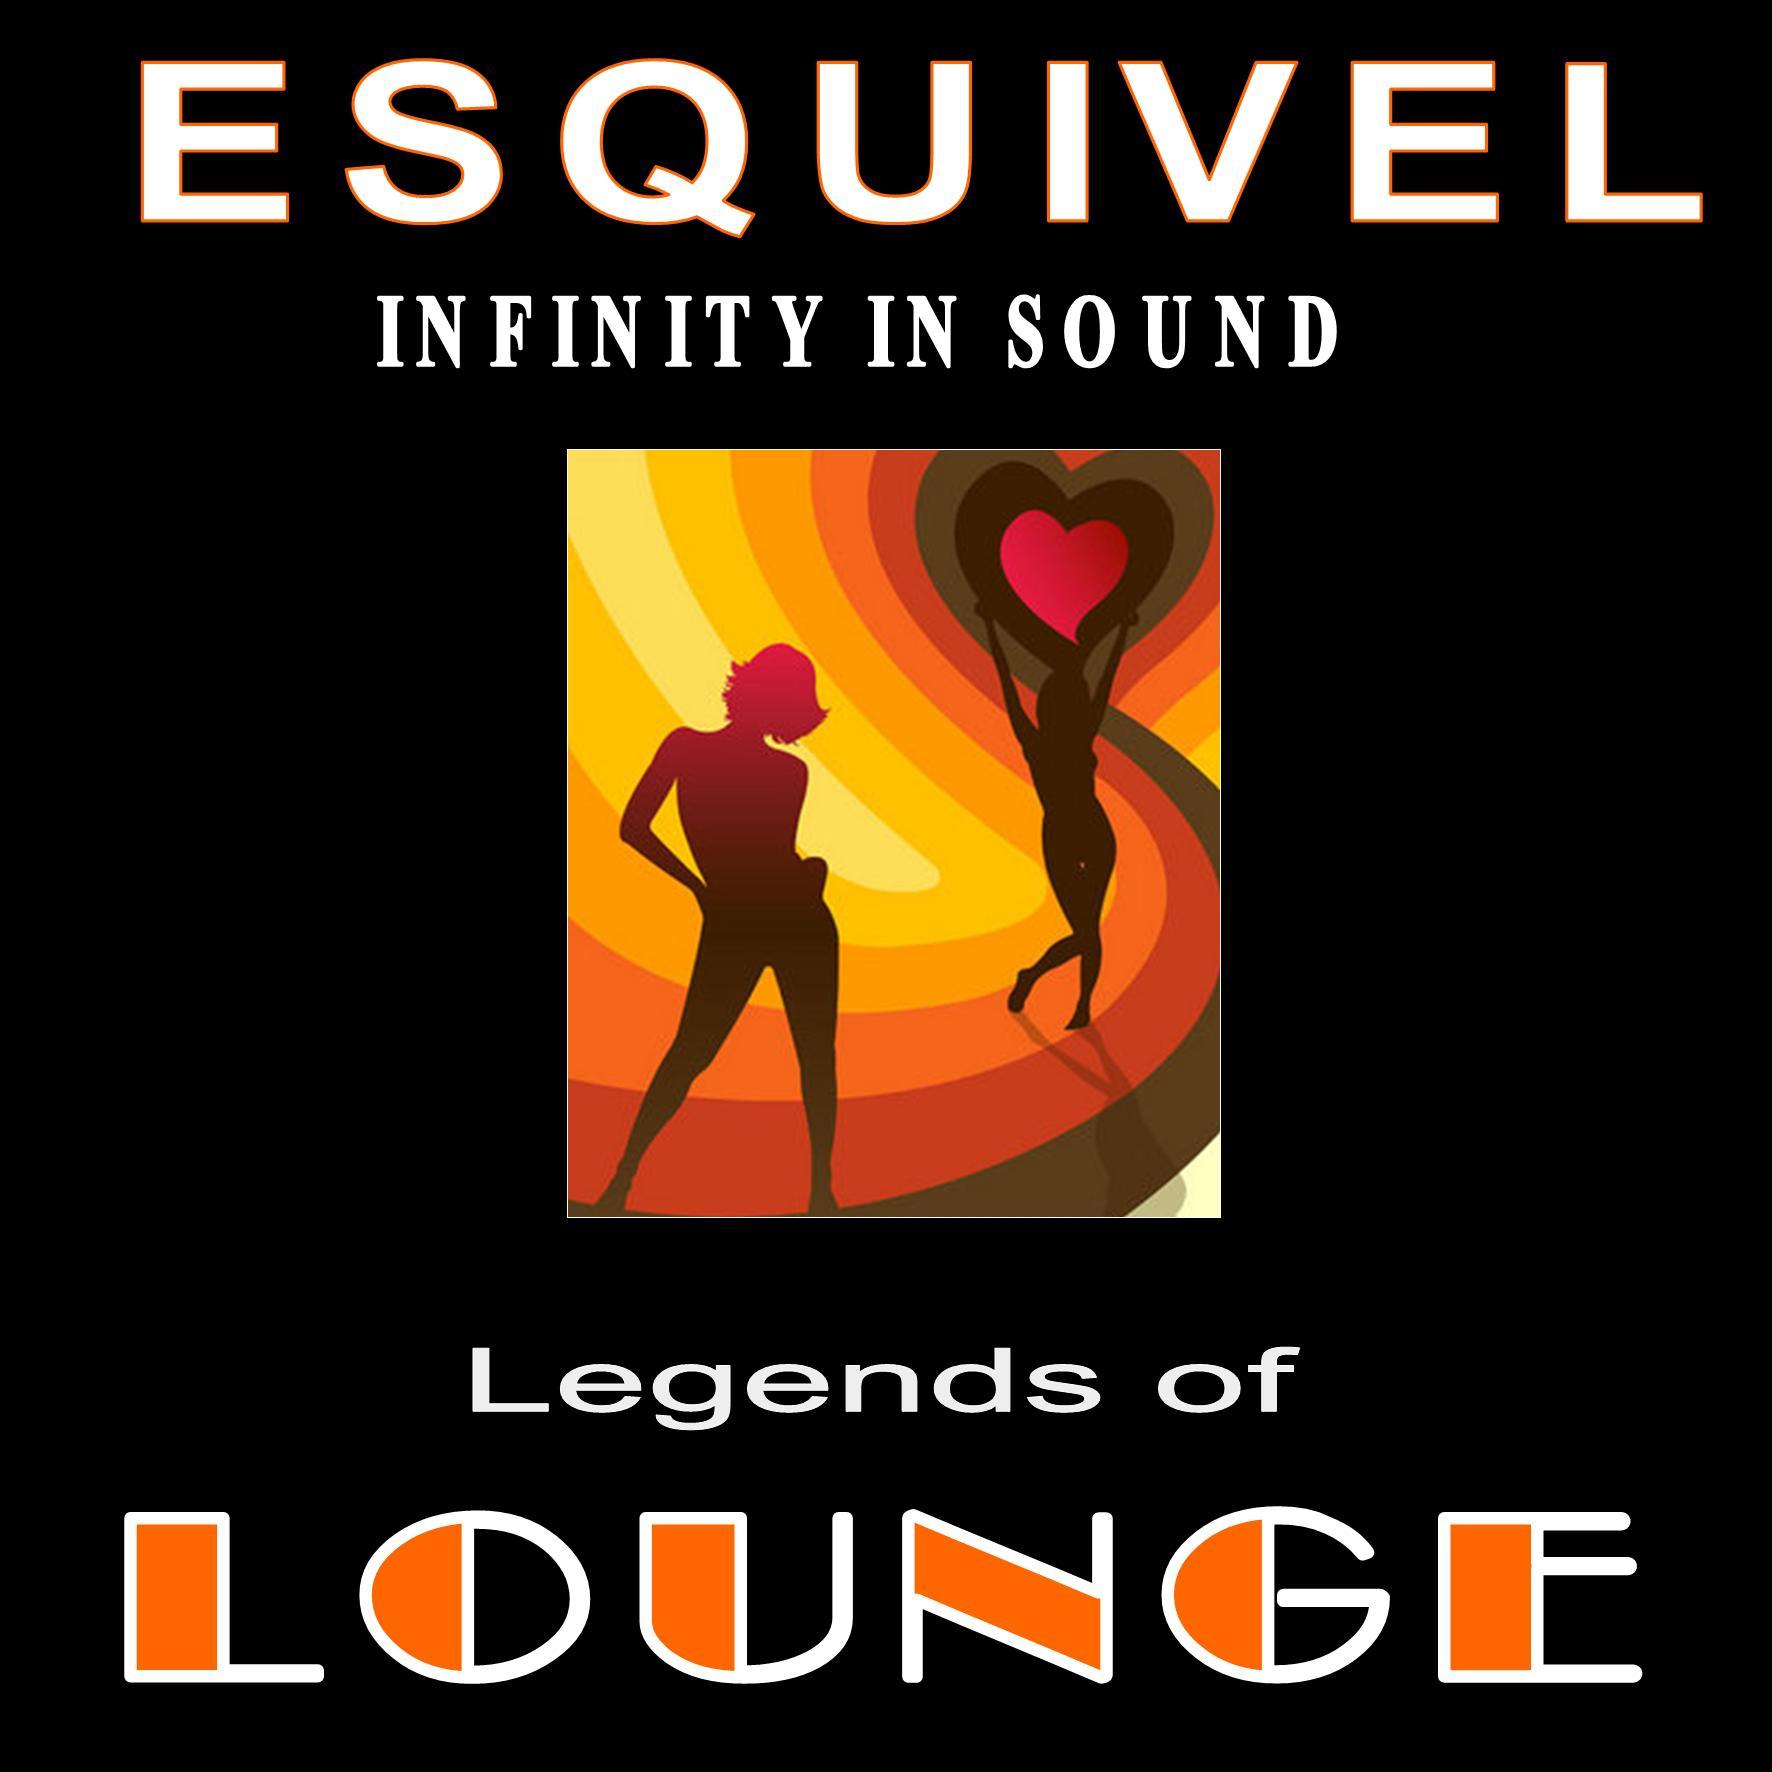 Legends of Lounge: Infinity in Sound